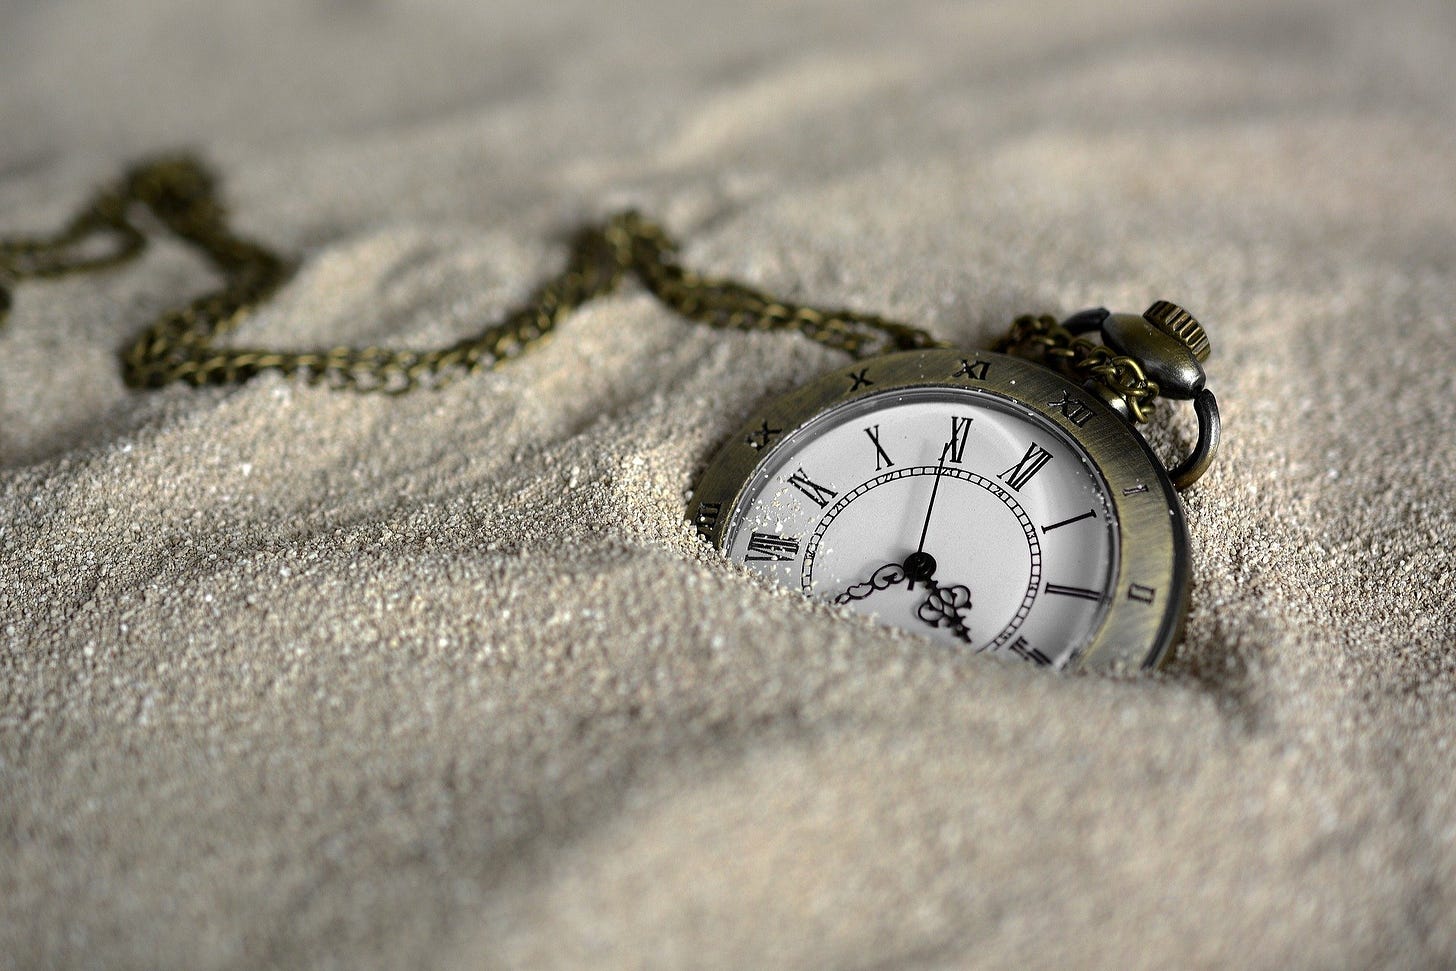 Pocket watch with Roman numerals and a chain half buried in sand